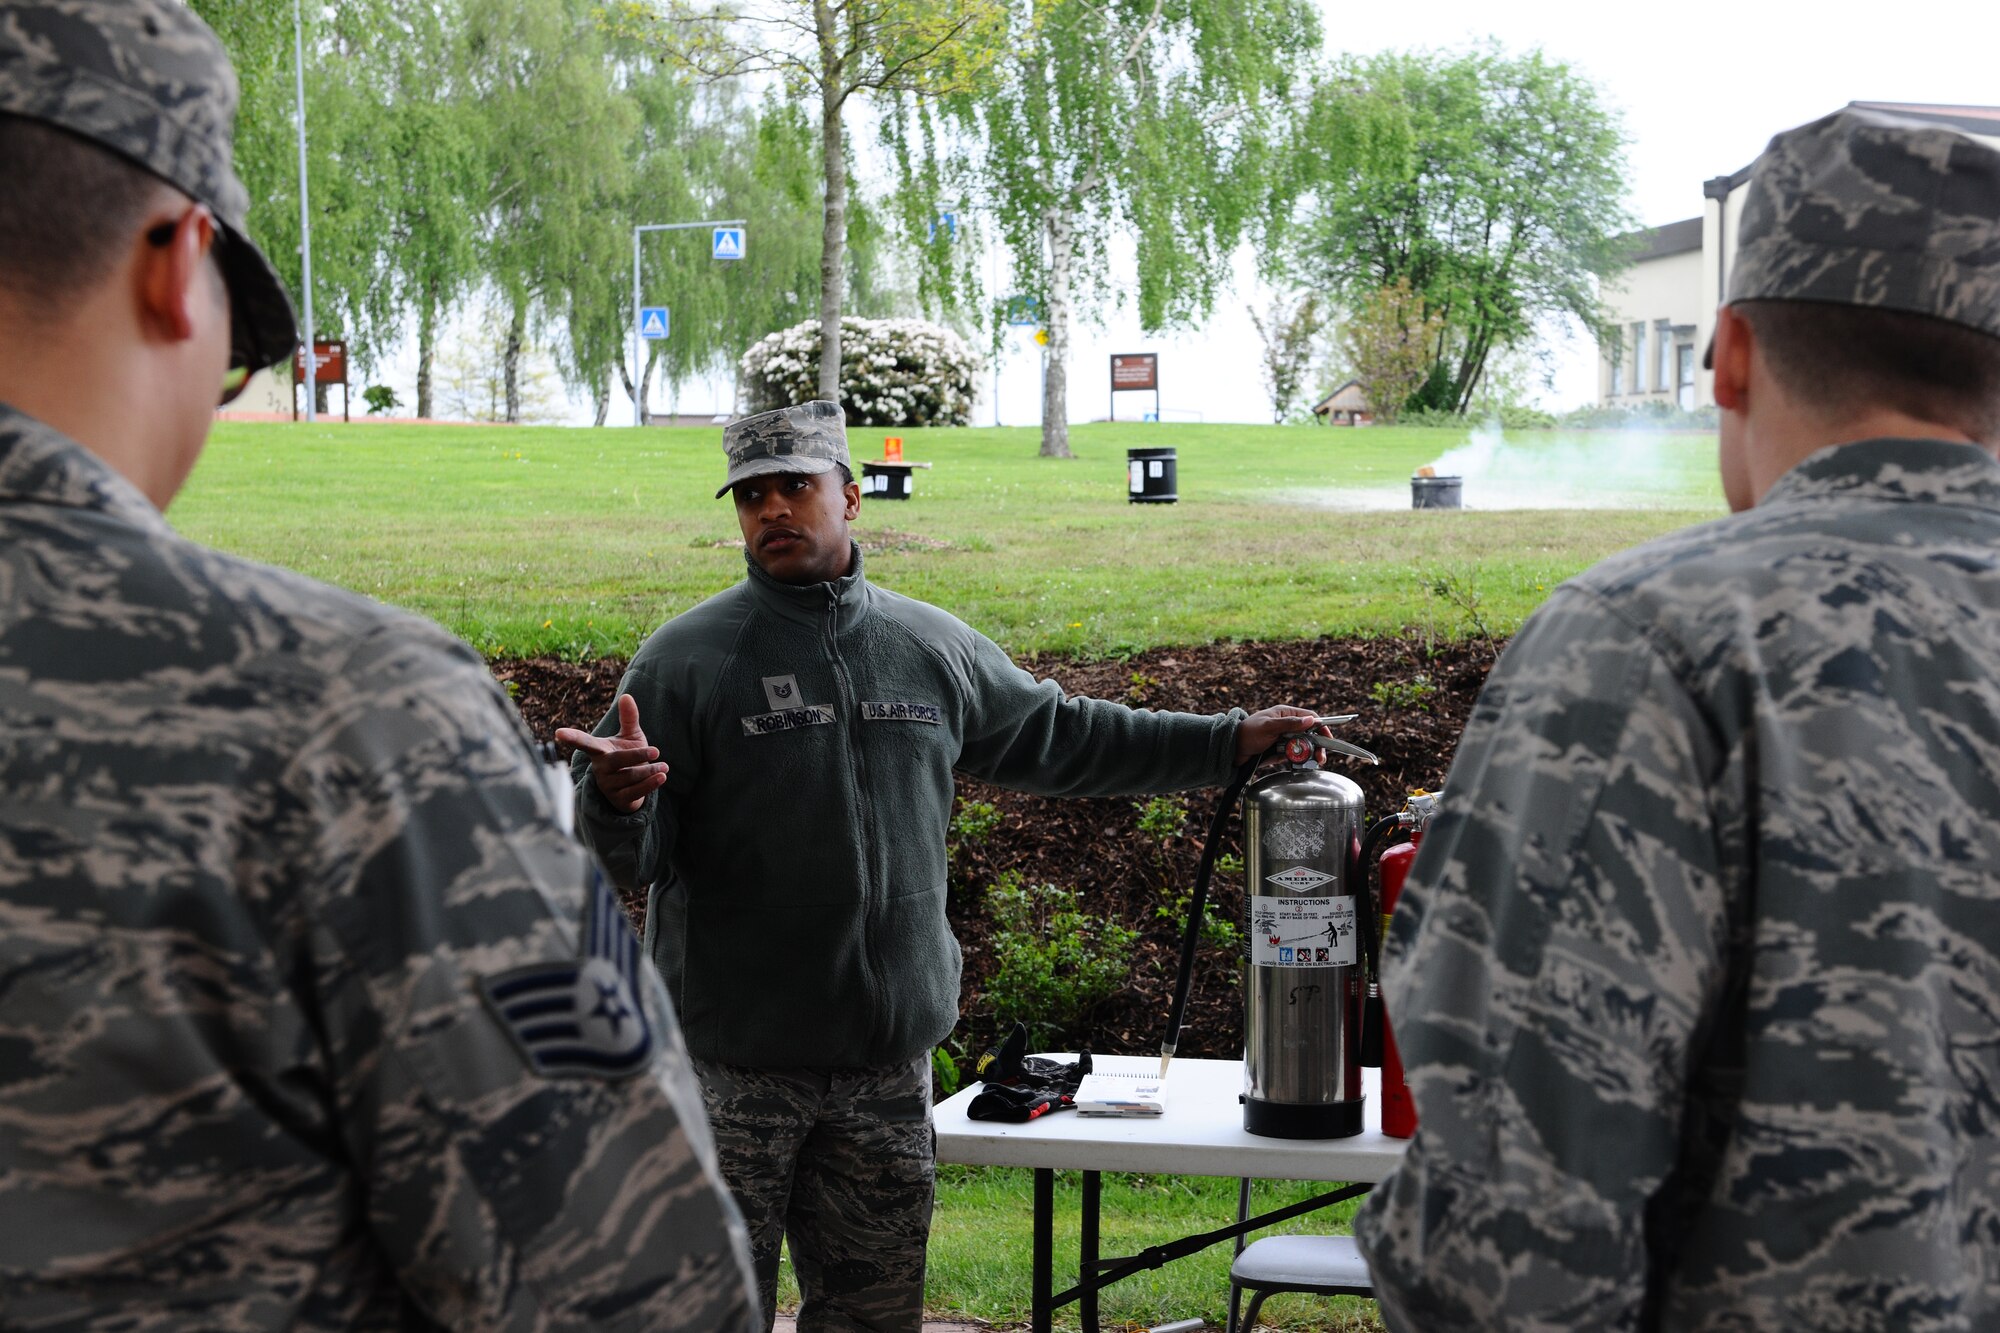 SPANGDAHLEM AIR BASE, Germany – Tech. Sgt. Daniel Robinson, center, 52nd Civil Engineer Squadron firefighter, explains the uses of the three different types of fire extinguishers to 52nd Fighter Wing Airmen during individual core competency skills training at the outdoor basketball court here May 7. The training evaluated Airmen on their combat readiness skills such as M-4 assault rifle weapons knowledge; self-aid buddy care; and chemical, biological, radiological, nuclear, and high-yield explosive preparedness. The training ensures the 52nd Fighter Wing is able to provide combat power to the current fight. (U.S. Air Force photo by Airman 1st Class Dillon Davis/Released)